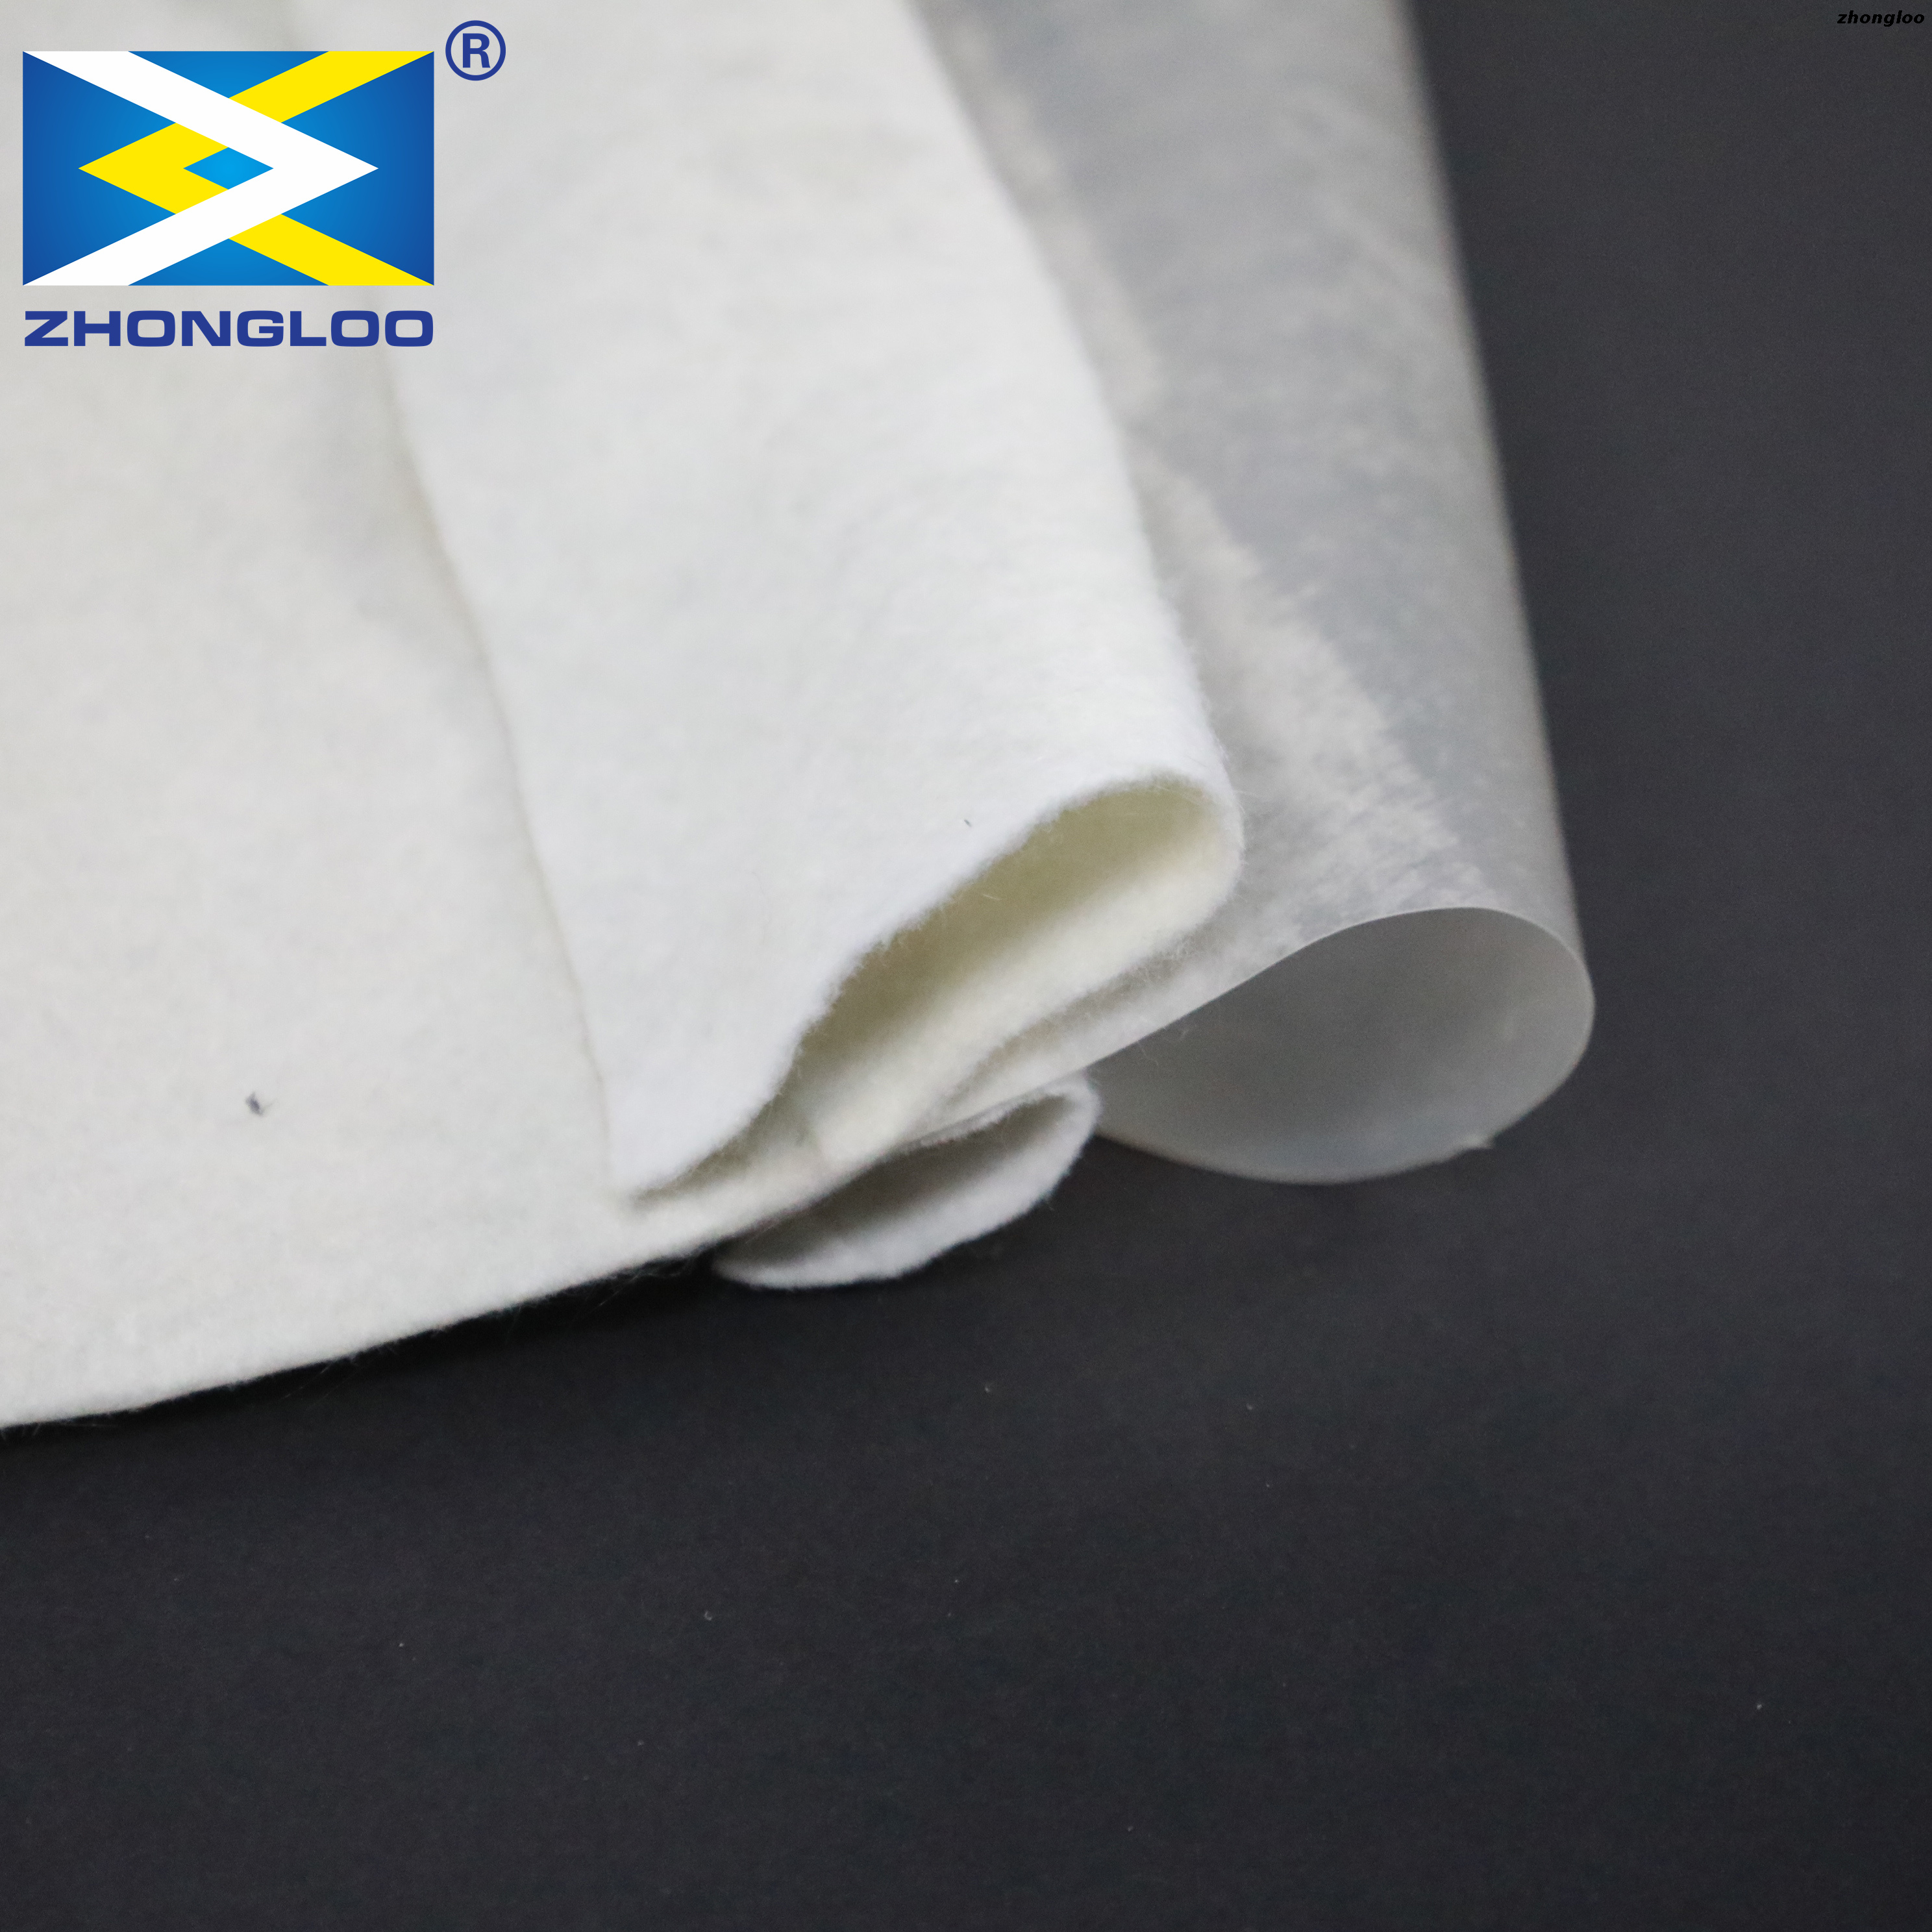 800g/m2 Waterproofing Sheet Material of Composite Geomembrane Geotextile 